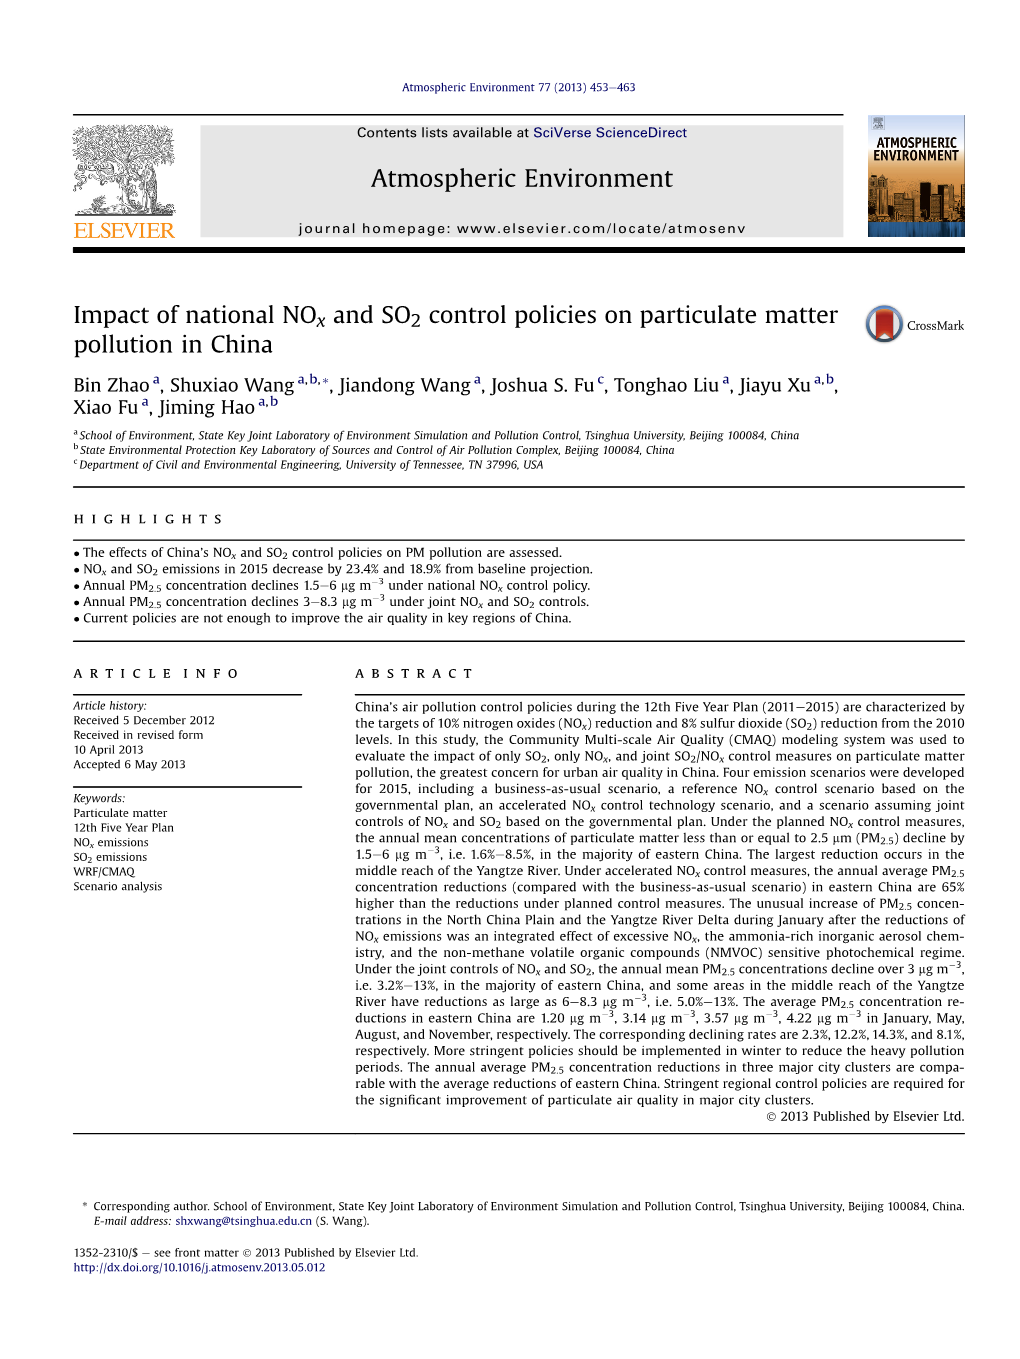 Impact of National Nox and SO2 Control Policies on Particulate Matter Pollution in China